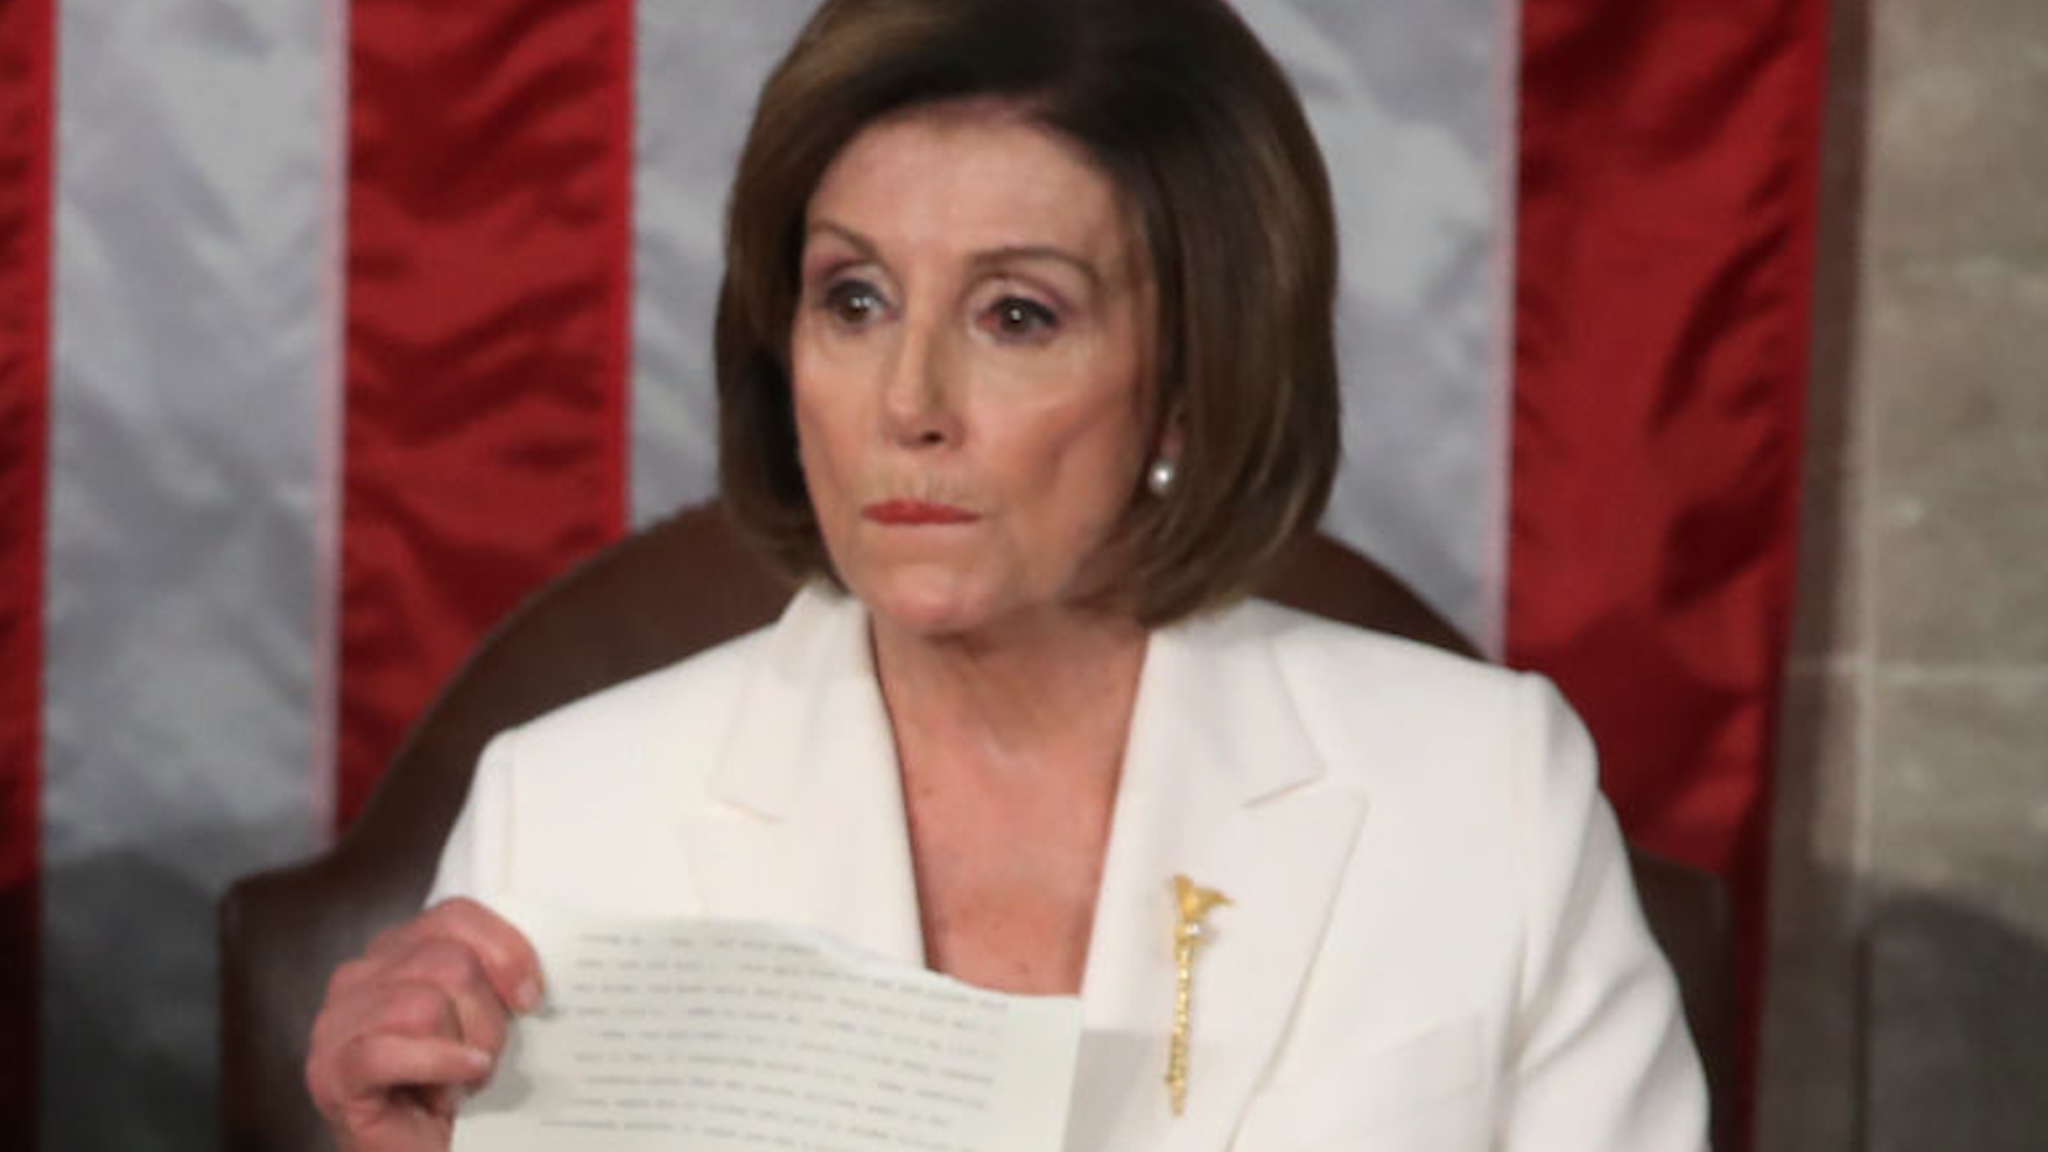 House Speaker Rep. Nancy Pelosi (D-CA) rips up pages of the State of the Union speech after U.S. President Donald Trump finishes his State of the Union speech in the chamber of the U.S. House of Representatives on February 04, 2020 in Washington, DC.